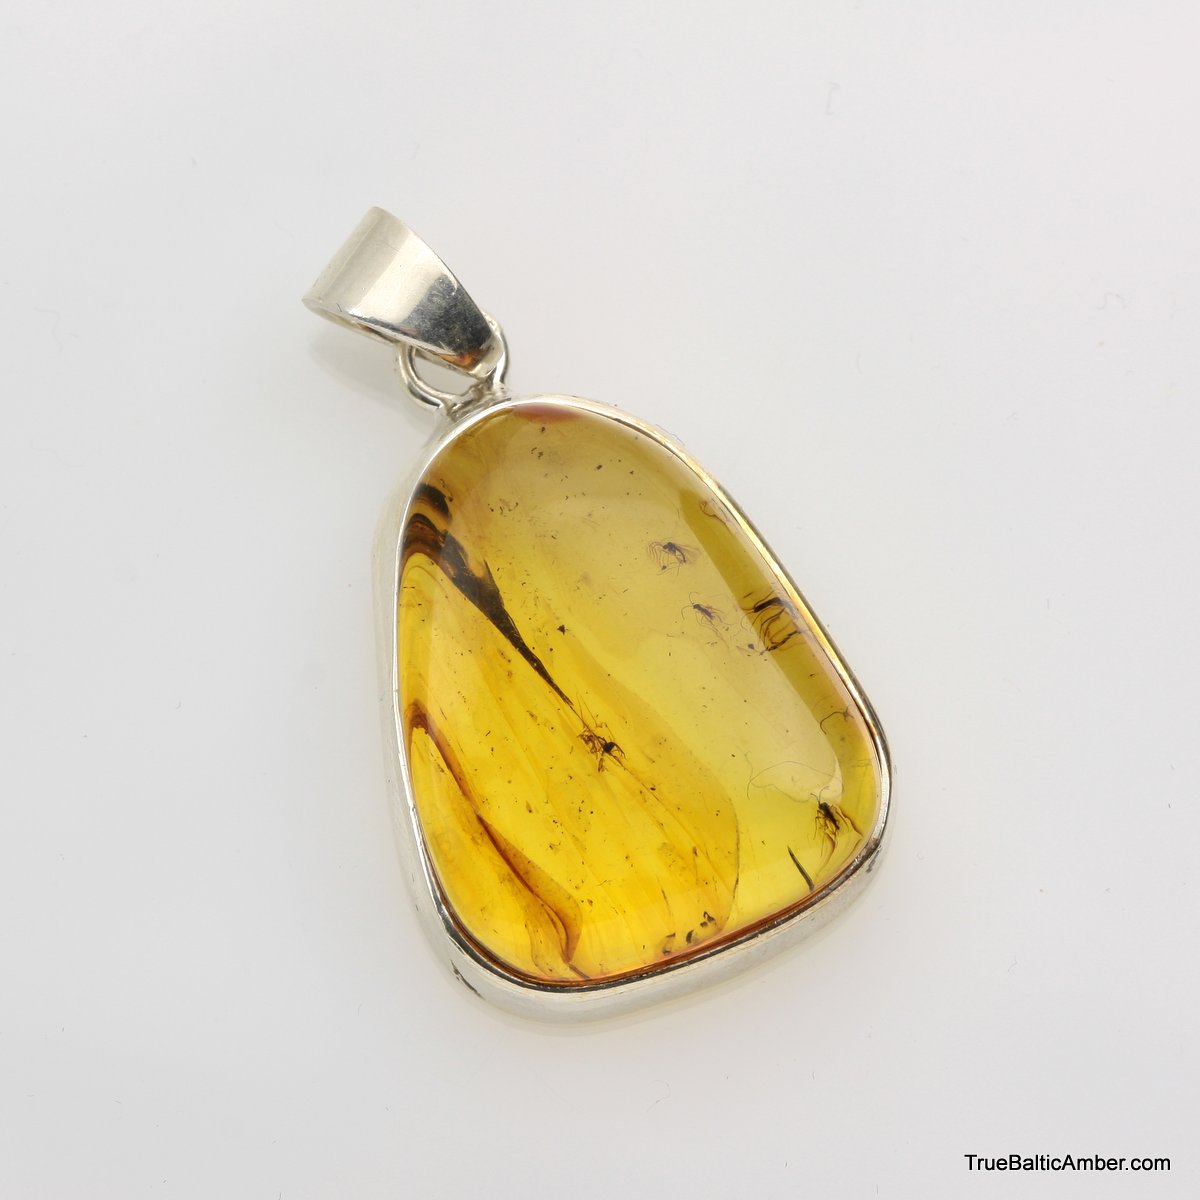 925 Sterling Silver Baltic Amber Pendant Necklace with Fossil trapped for Million Years Natural Amber Jewelry Amber Pendant with Insect